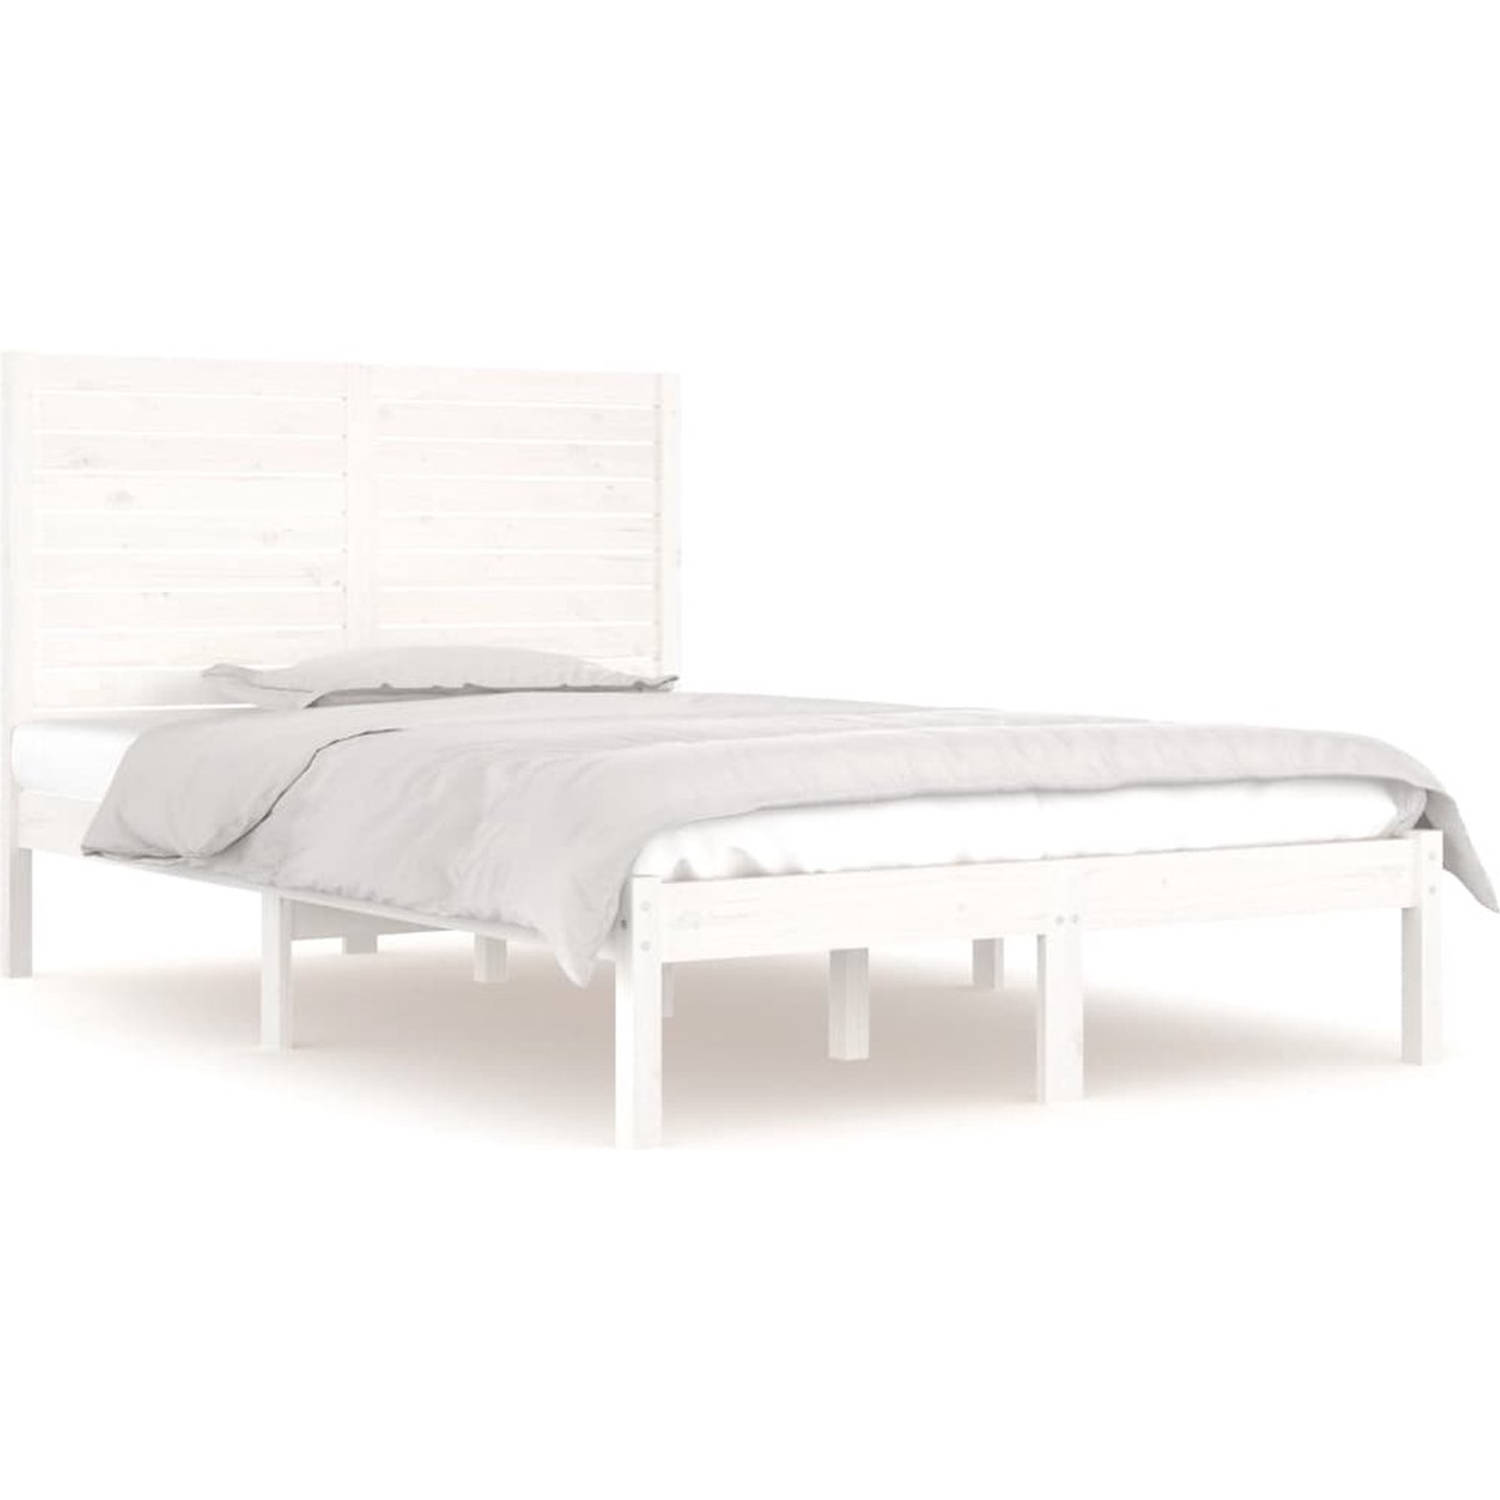 The Living Store Bedframe Grenenhout - Wit - 195.5 x 126 x 100 cm - 4FT Small Double Max 150 karakters